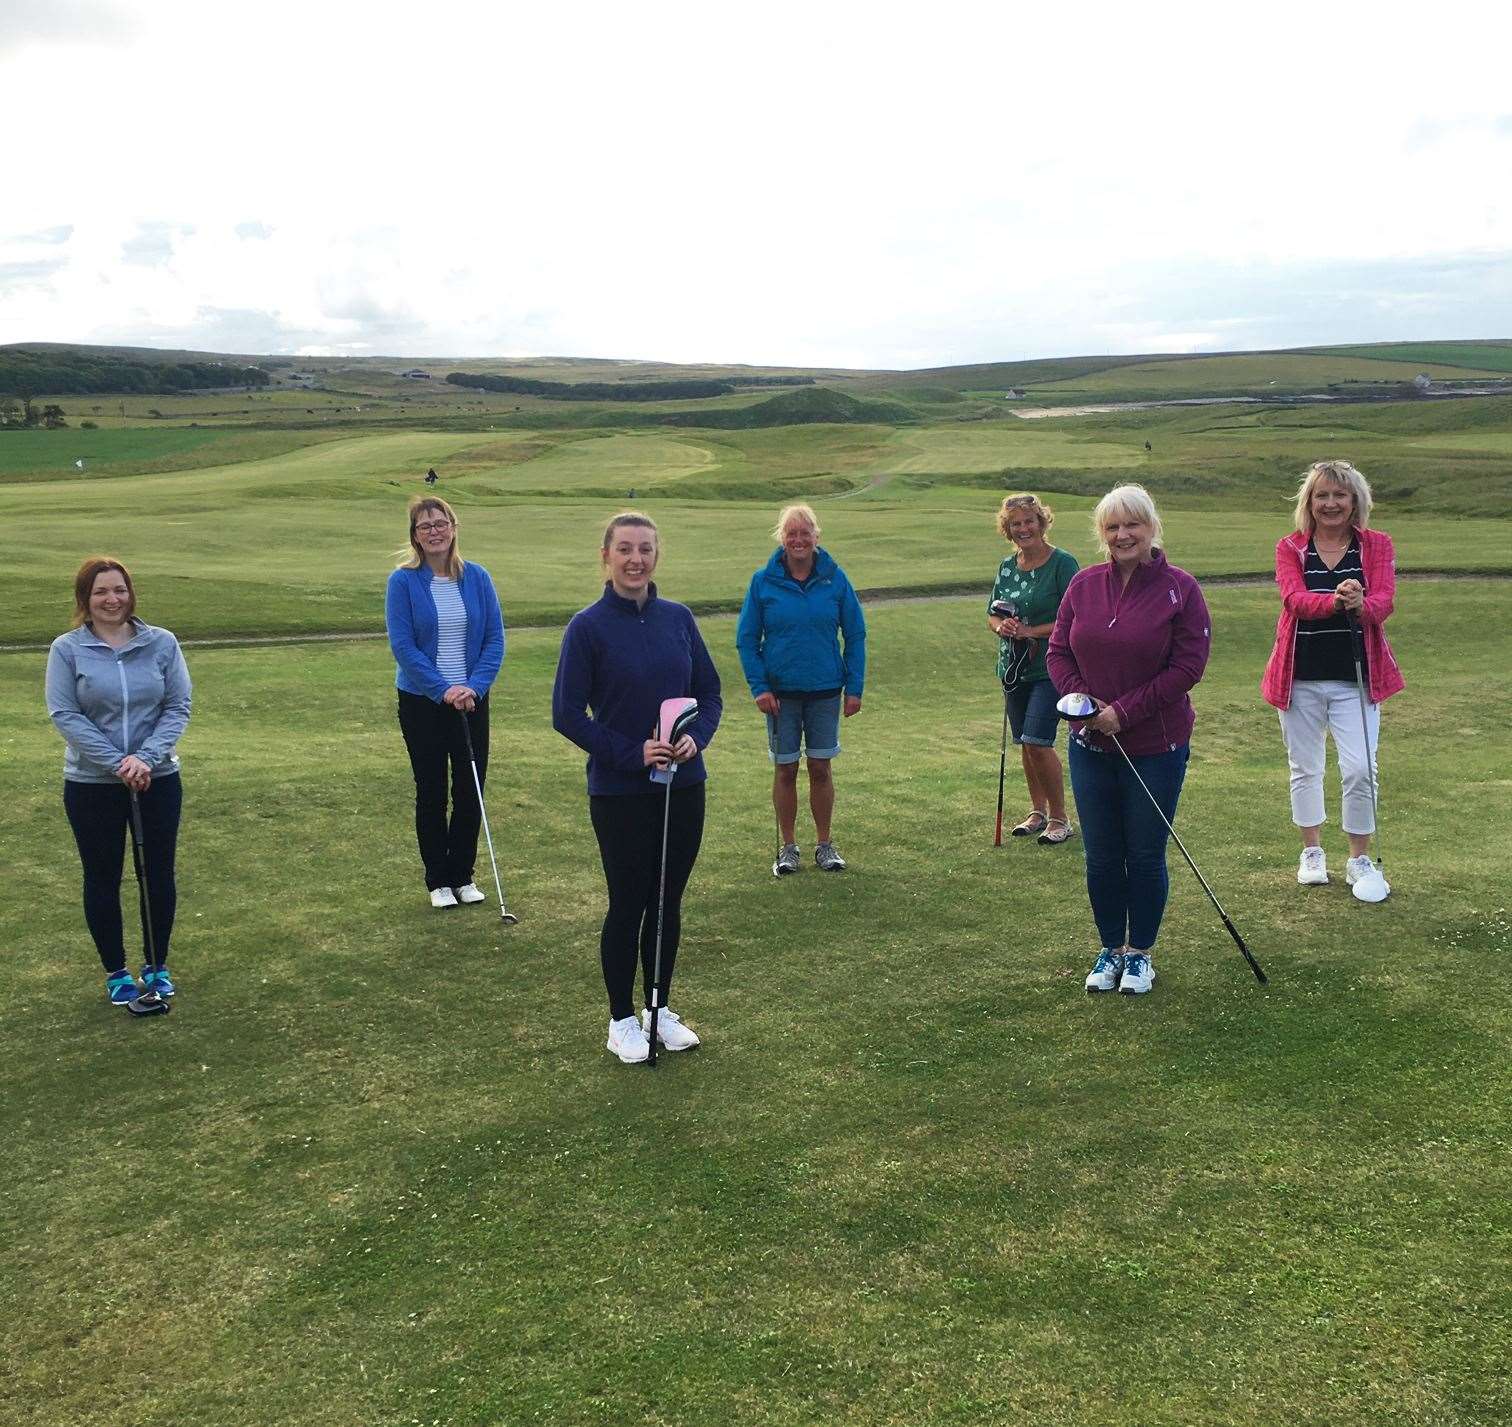 Some of Reay Golf Club's new lady members who were enjoying a practice session with their fellow beginners last Thursday night.